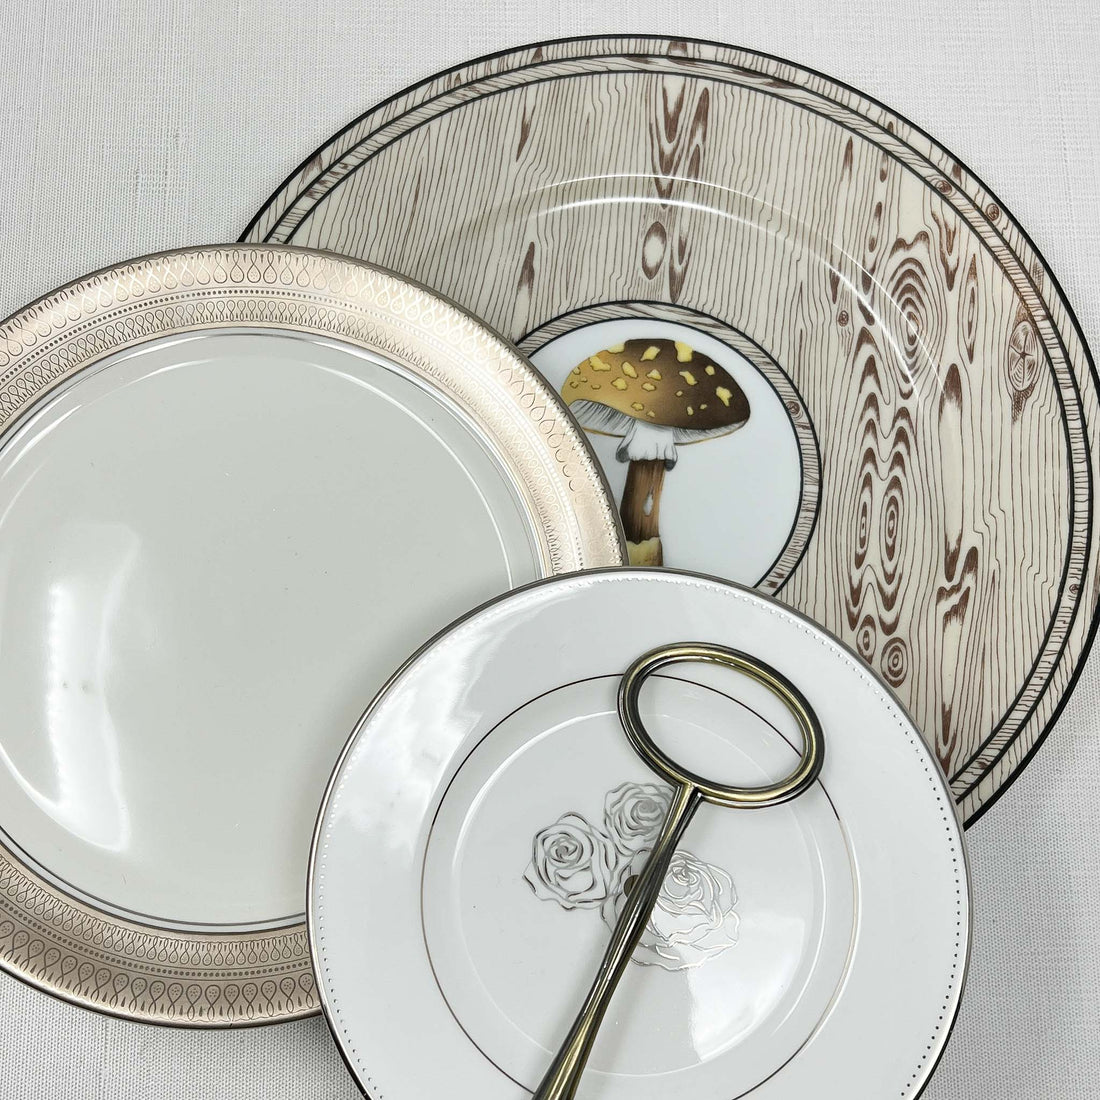 Chanterelle Serving Tray | The Brooklyn Teacup - The Brooklyn Teacup